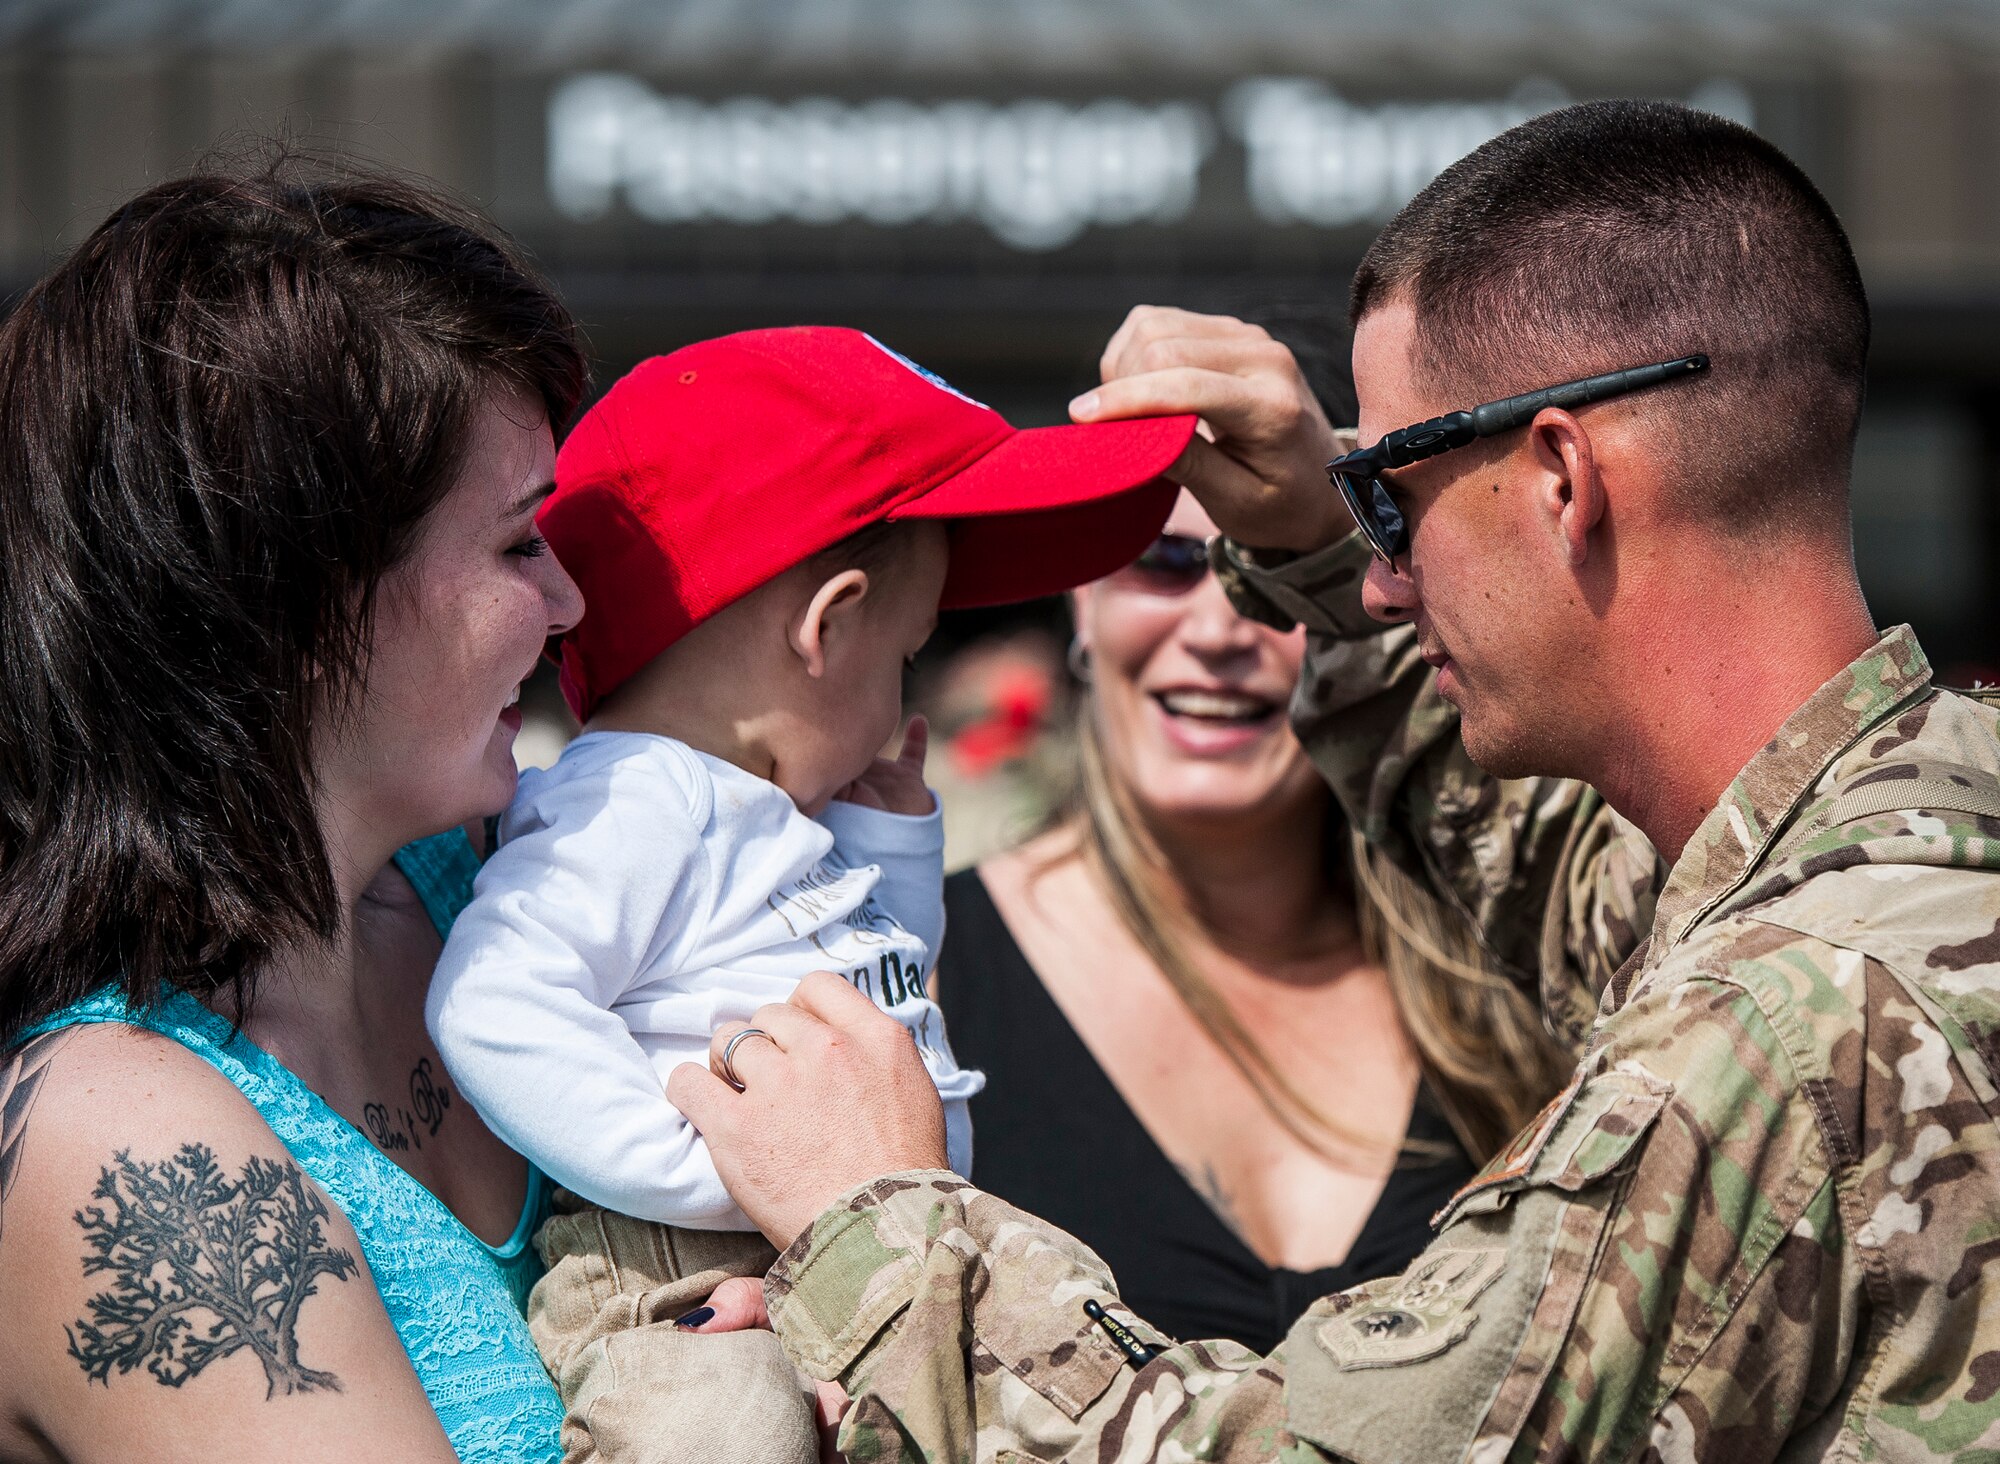 Senior Airman Michael Blankenship, 560th Red Horse Squadron, Embraces his wife Krystal and son Landon after returning from the unit’s first six month deployment April, 11, 2013, at Joint Base Charleston, S.C.  The Air Force Reservists have been deployed as part of the the 557th Expeditionary RED HORSE Squadron since November and were responsible for heavy construction projects at various Middle Eastern locations. (U.S. Air Force photo/ Senior Airman Dennis Sloan)